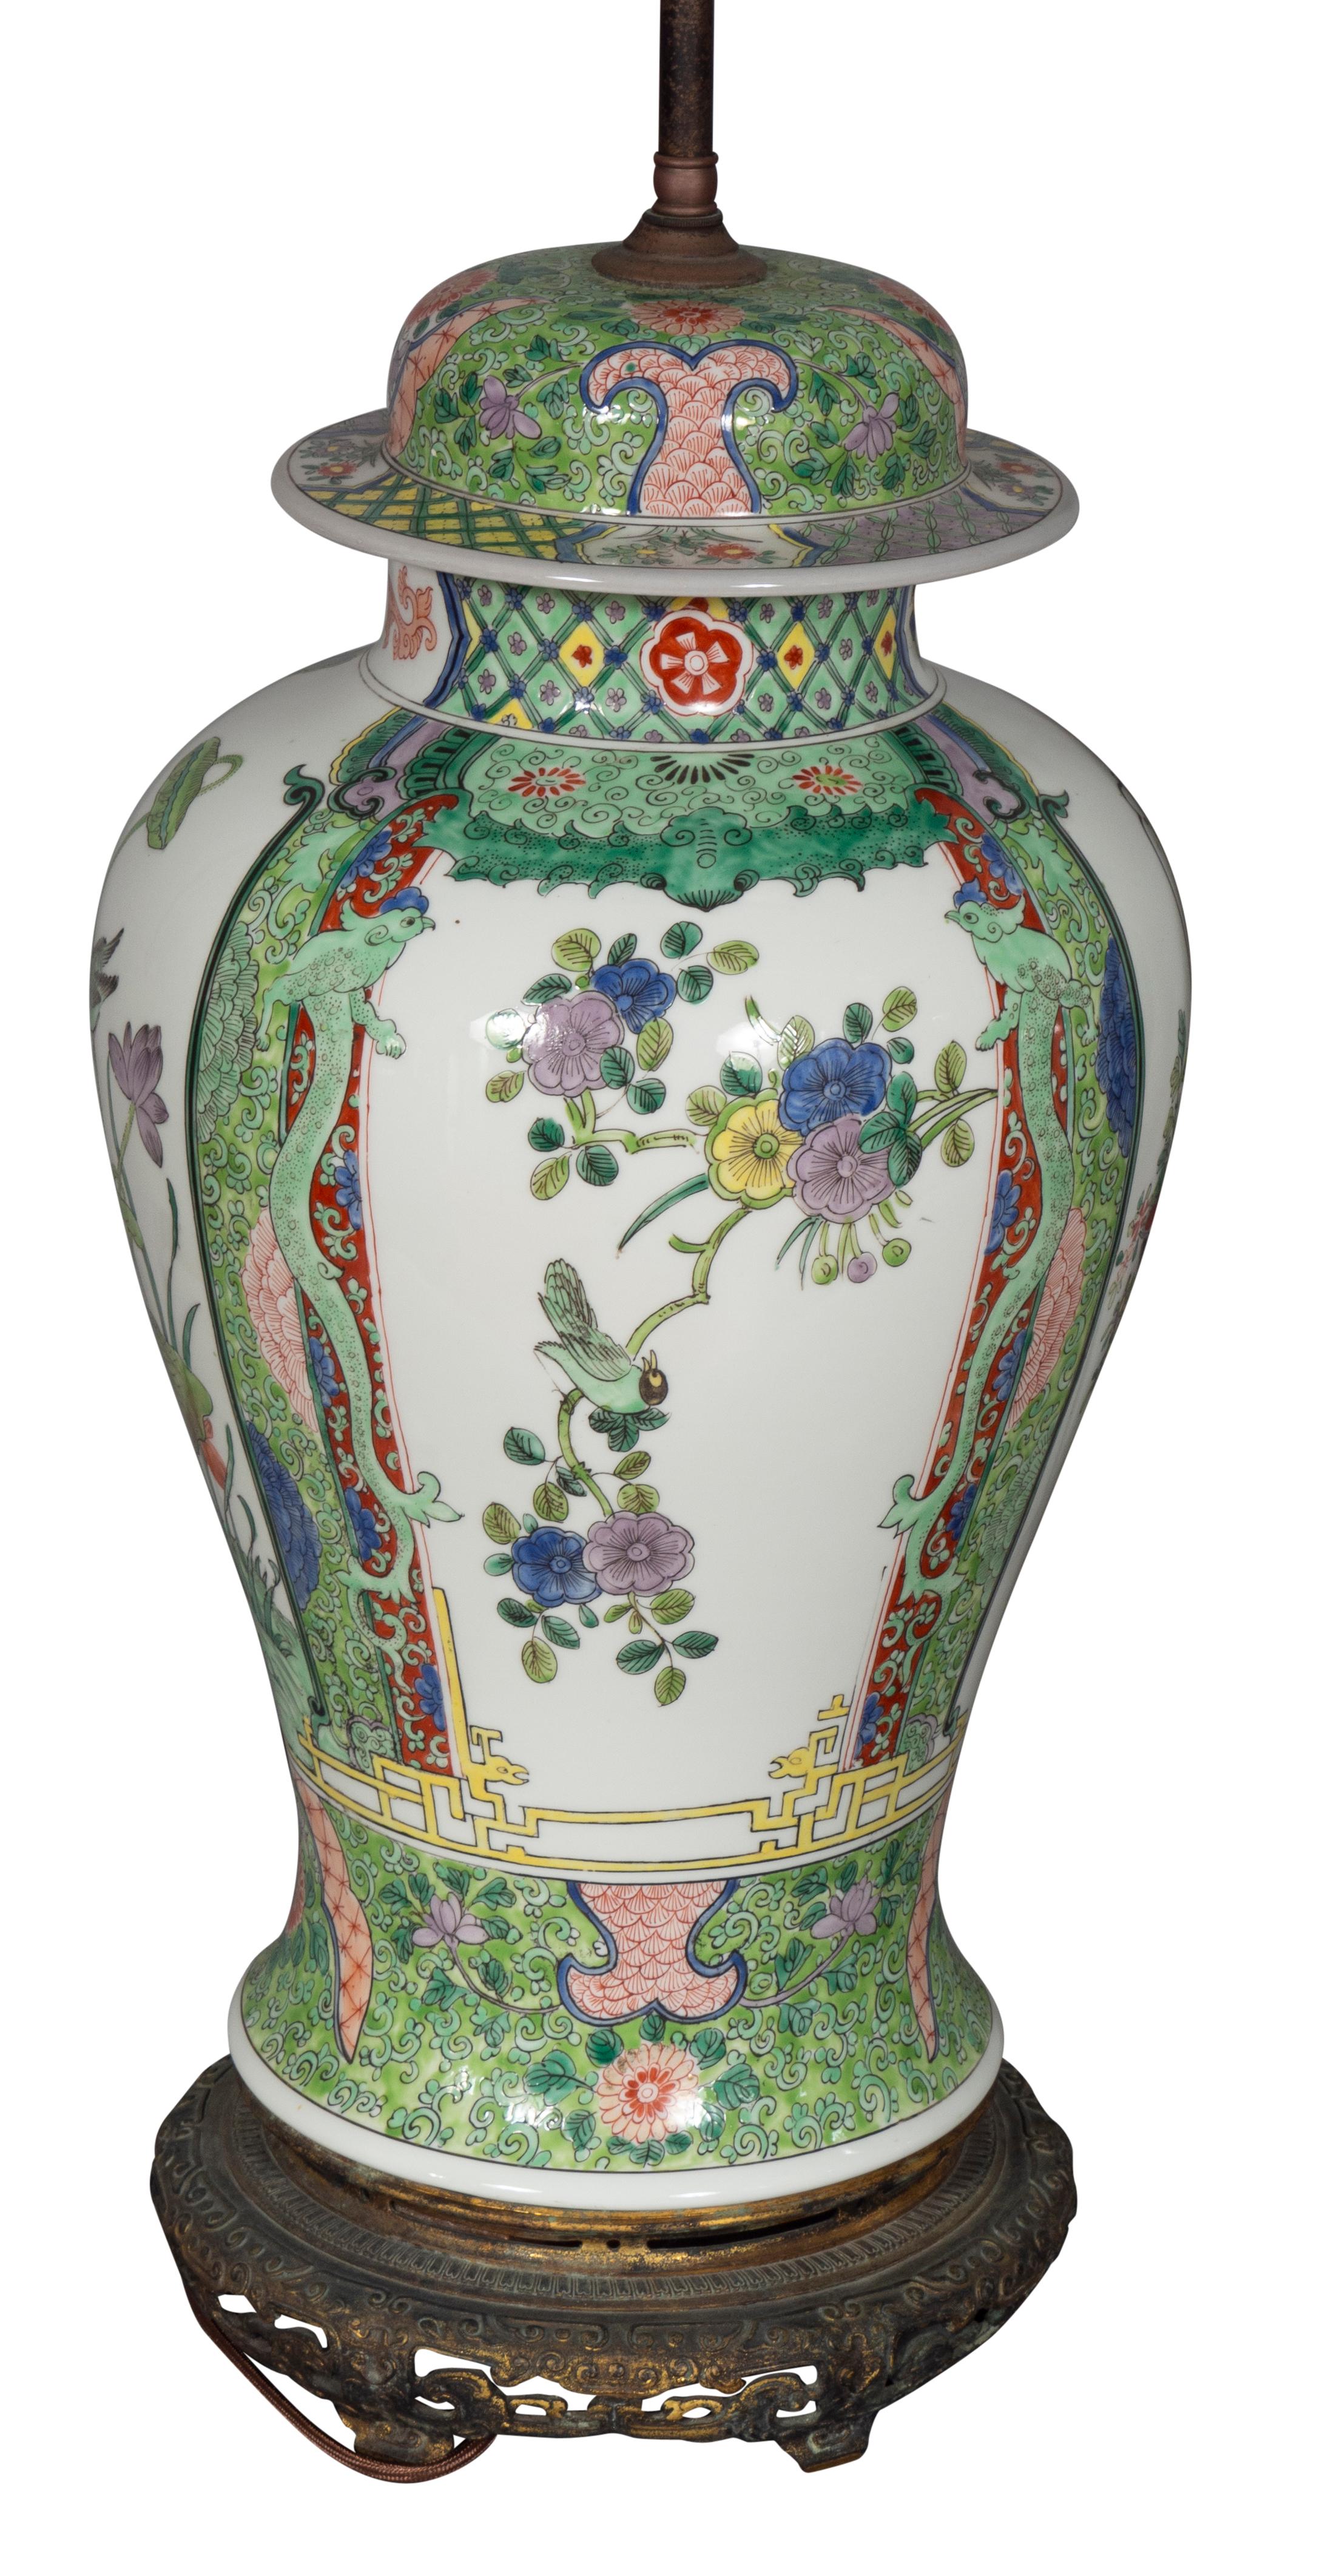 Pair of Samson Porcelain Ginger Jar Table Lamps in the Chinese Export Style For Sale 4